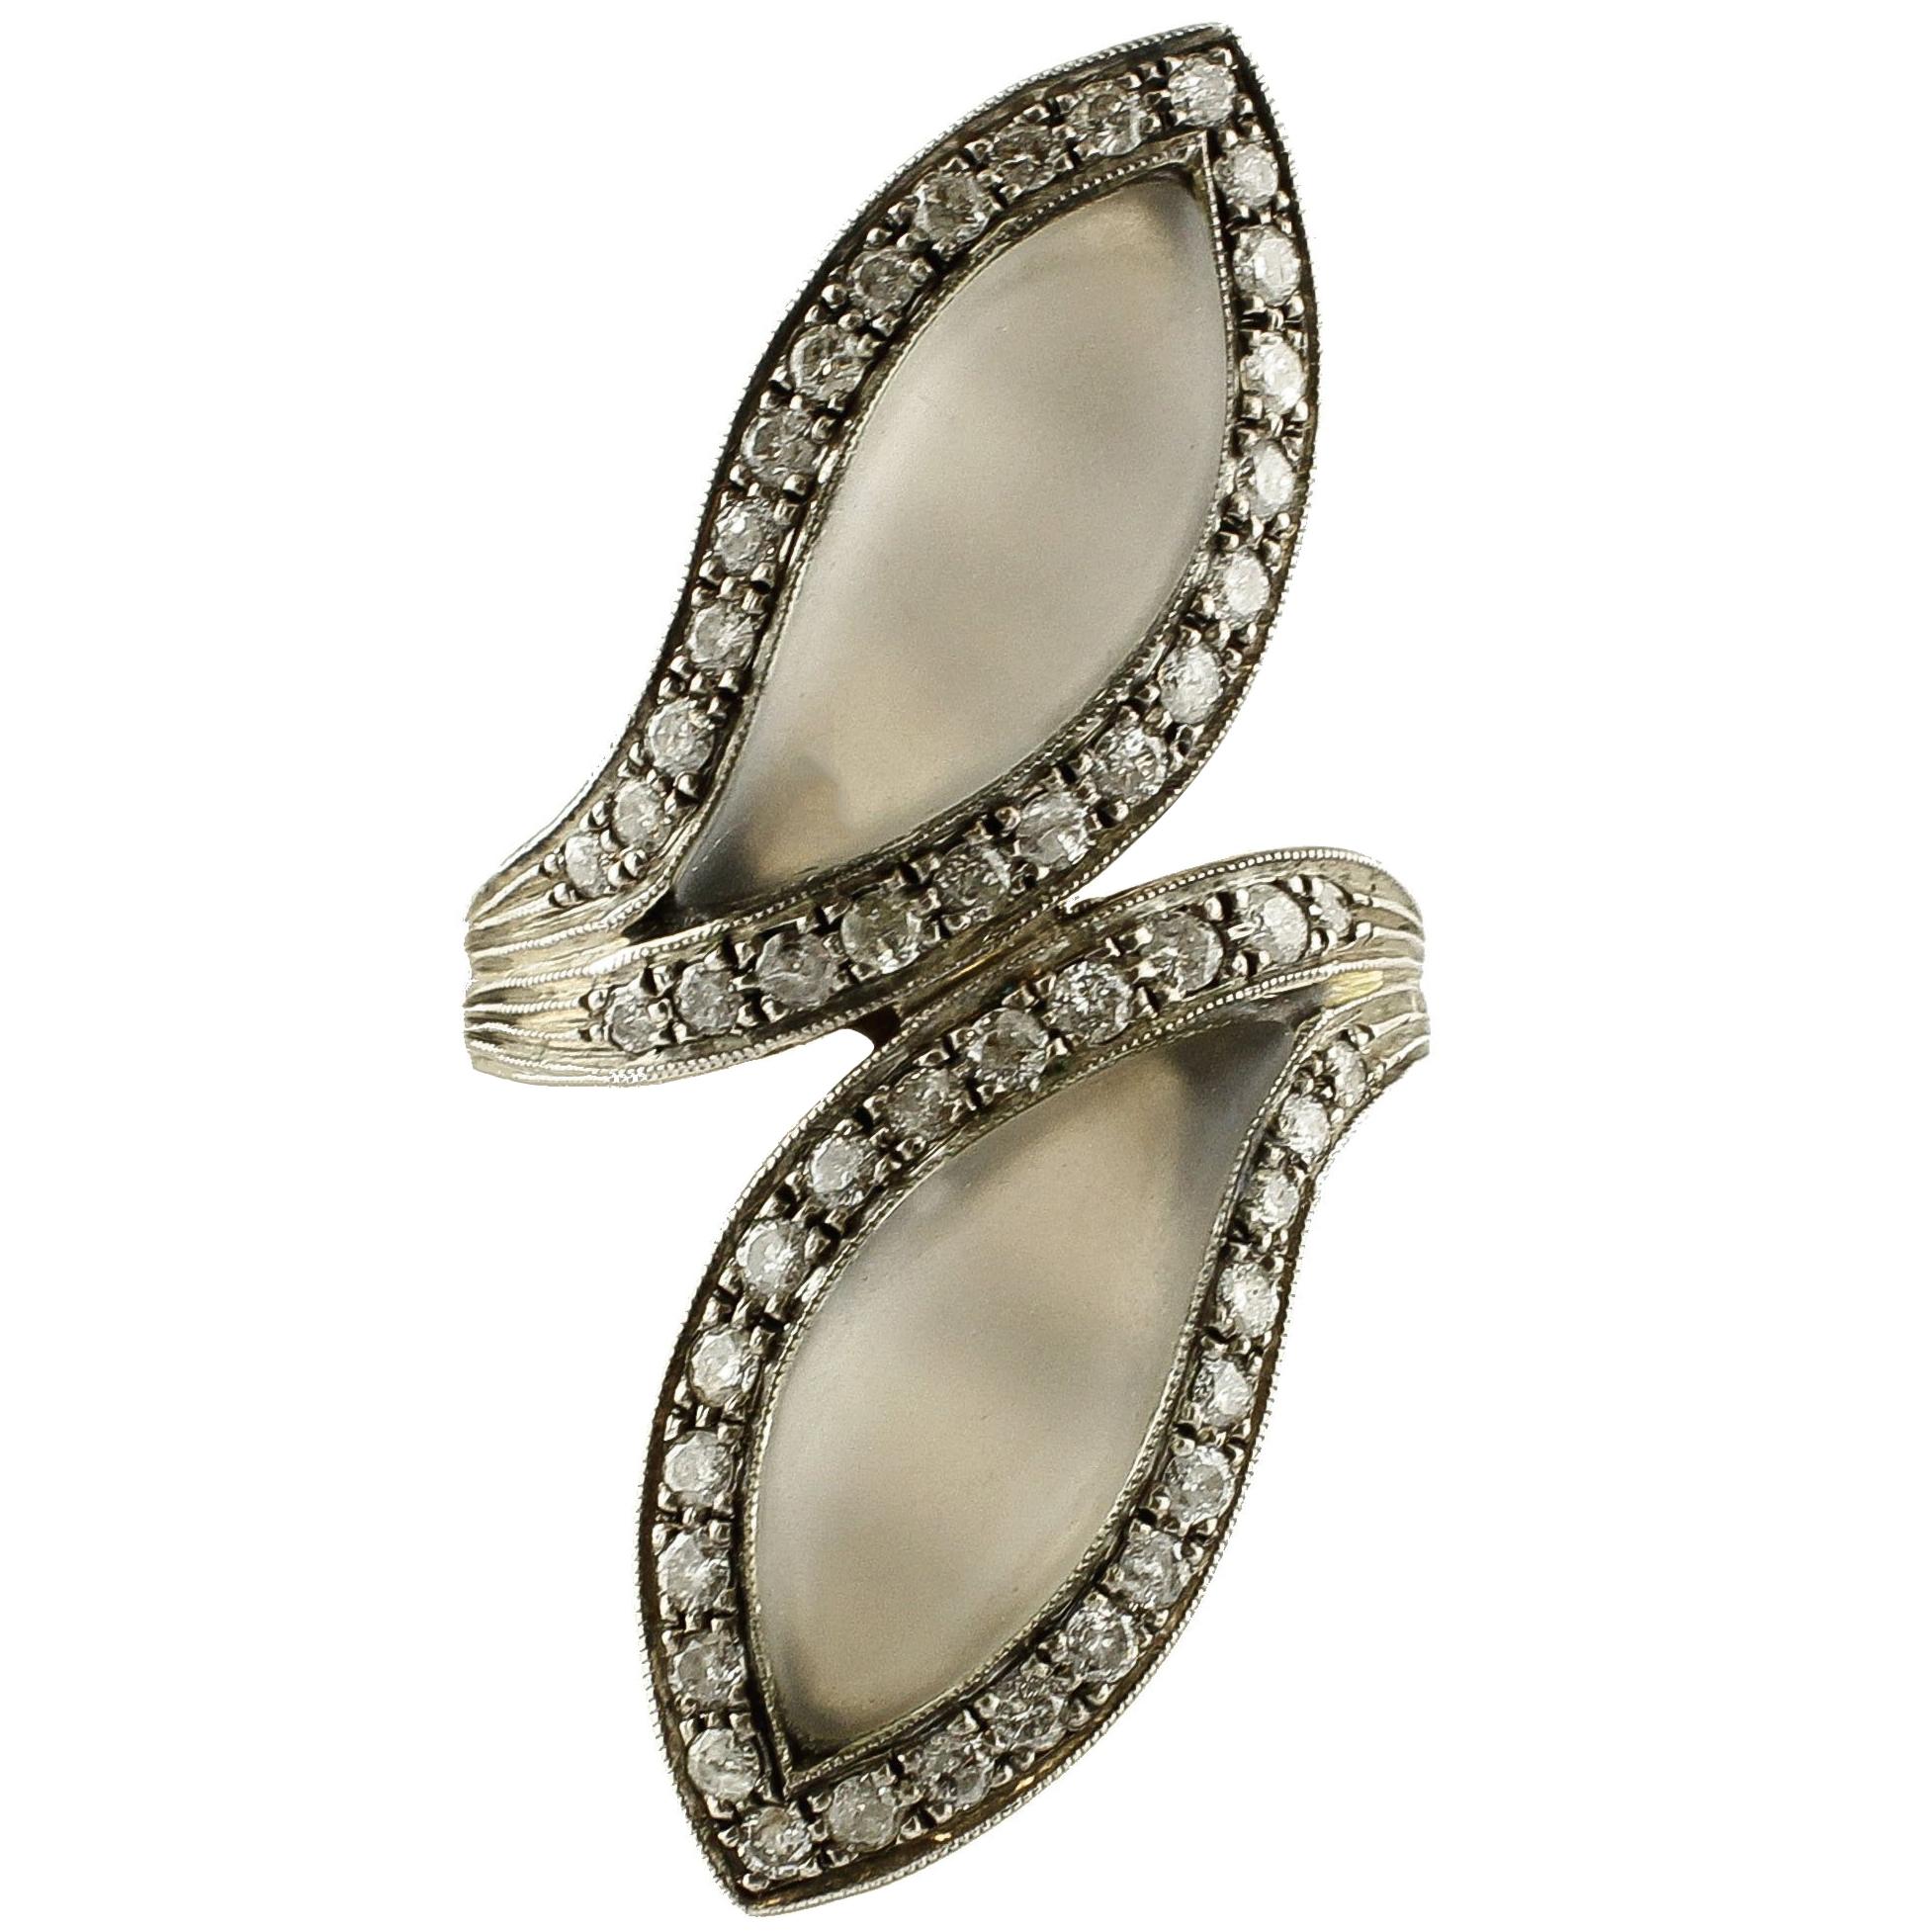 Diamonds, Rock Crystal, 14 Kt Rose Gold and Silver Fashion Ring.